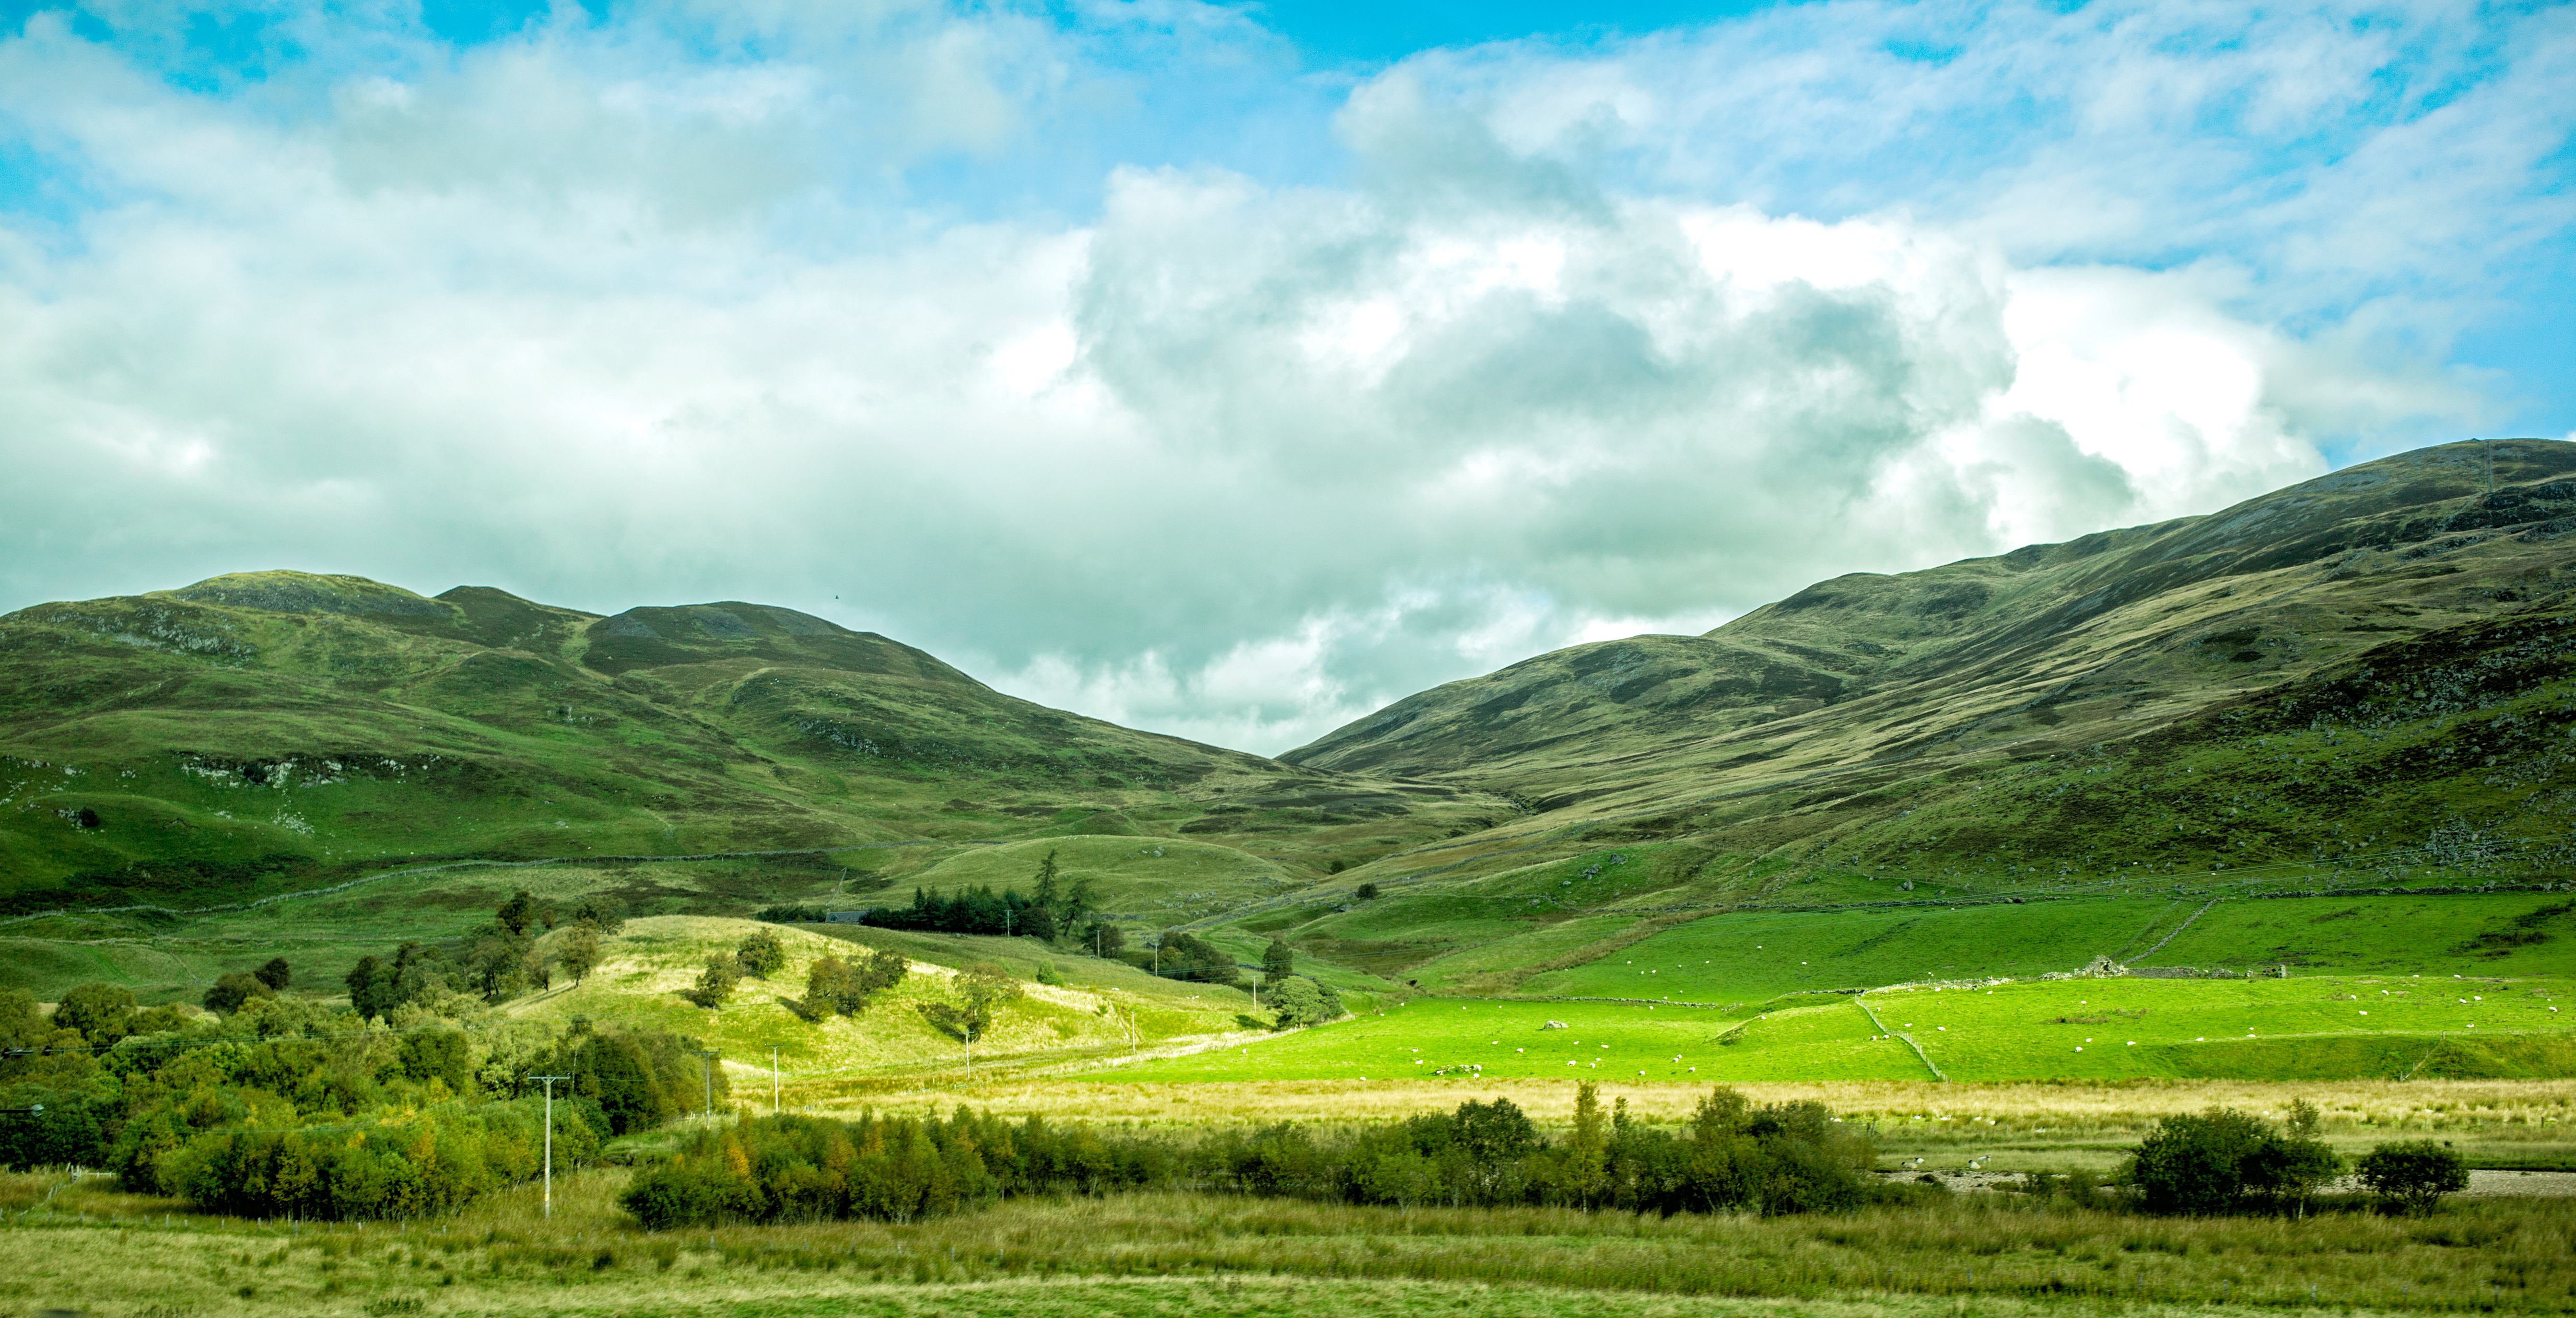 Landscape of Scotland with two green hills and blue sky with clouds.